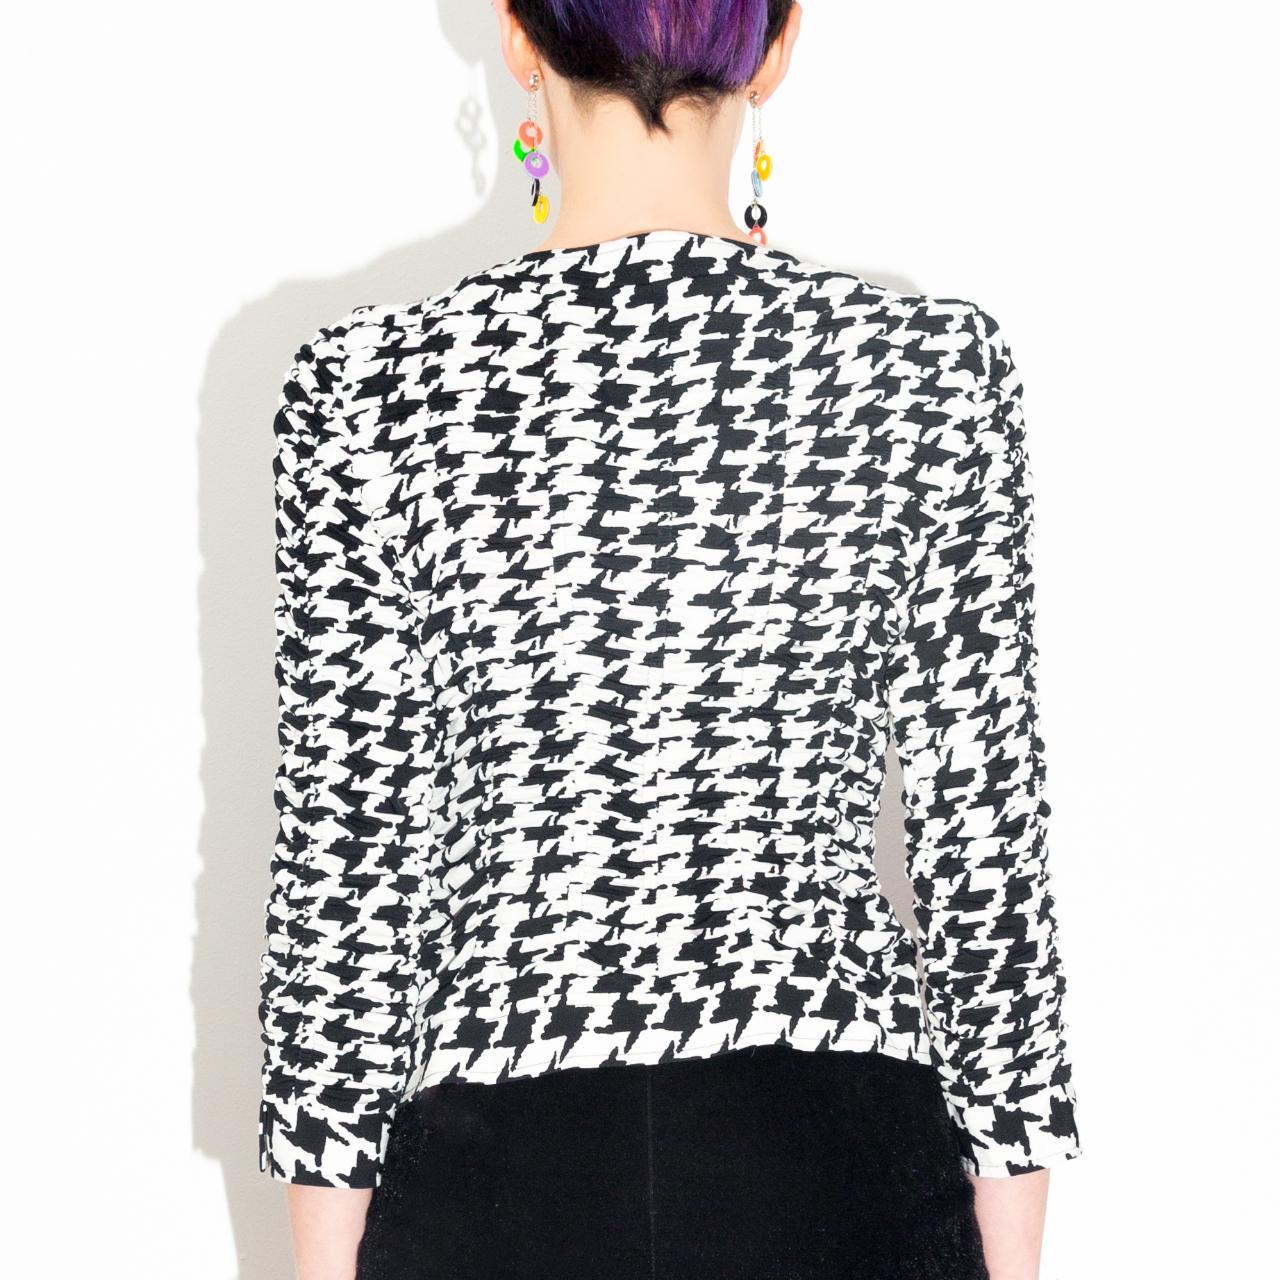 Product Image 4 - Black and white houndstooth patterned